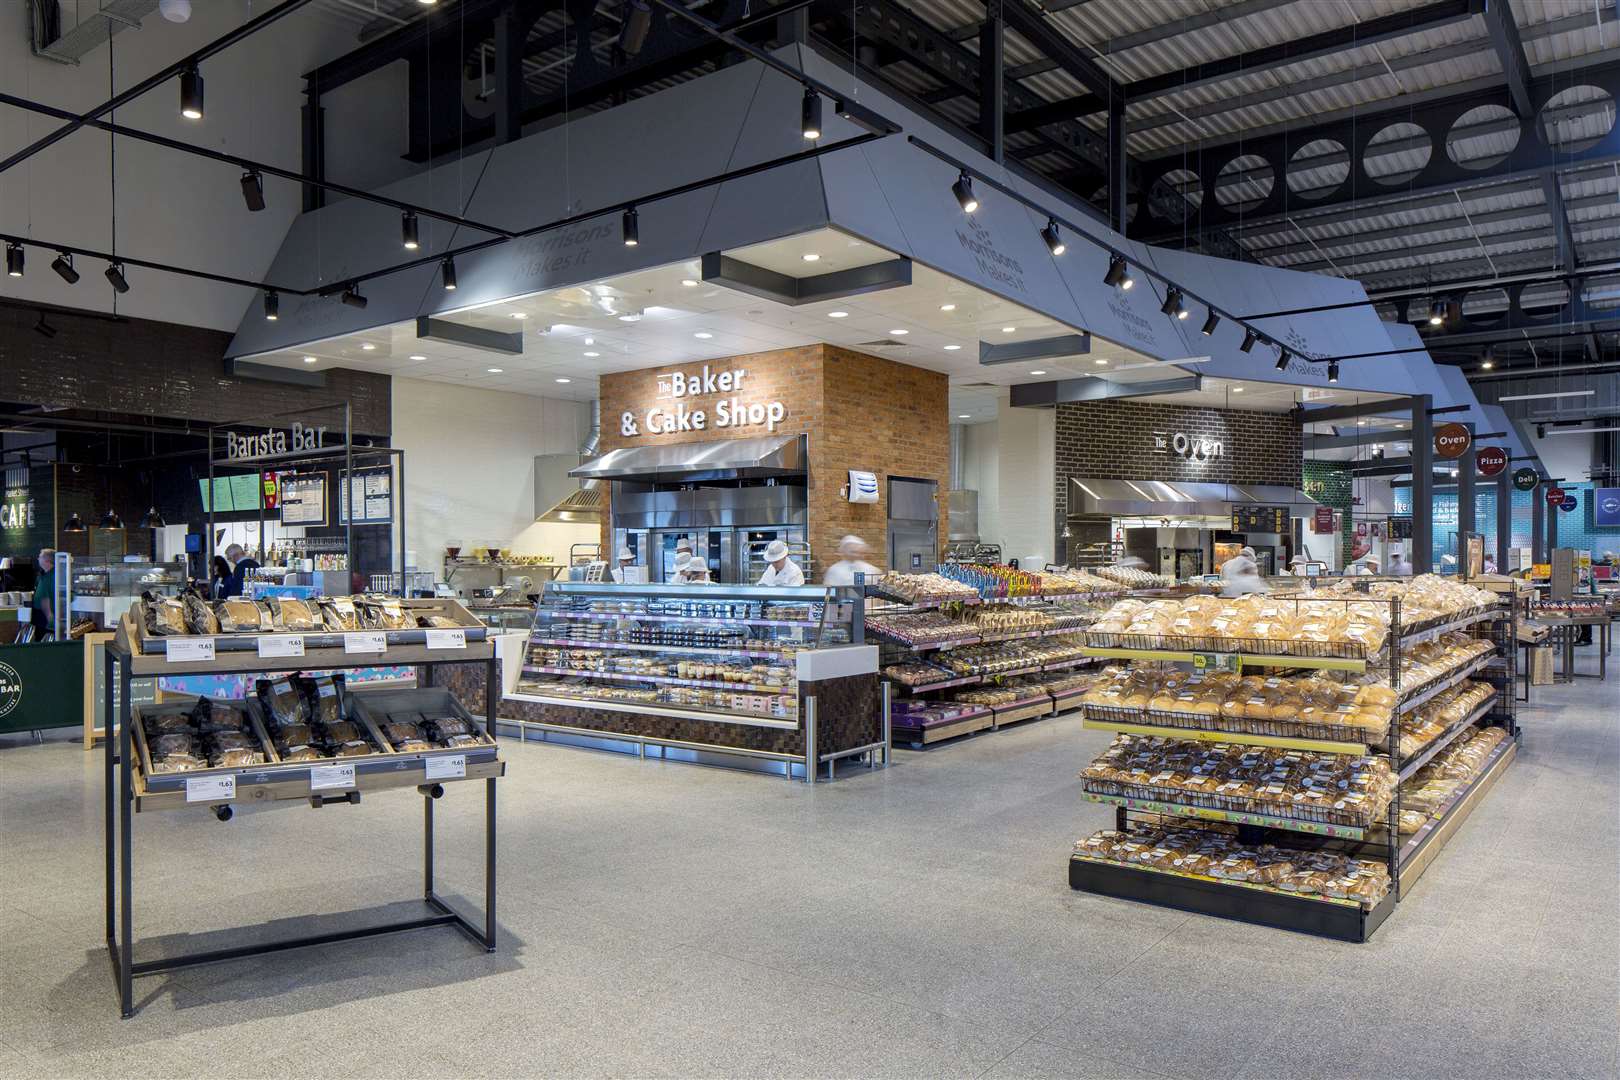 New photos show what the inside of Folkestone's new supermarket could look like - they were taken from other recently completed stores